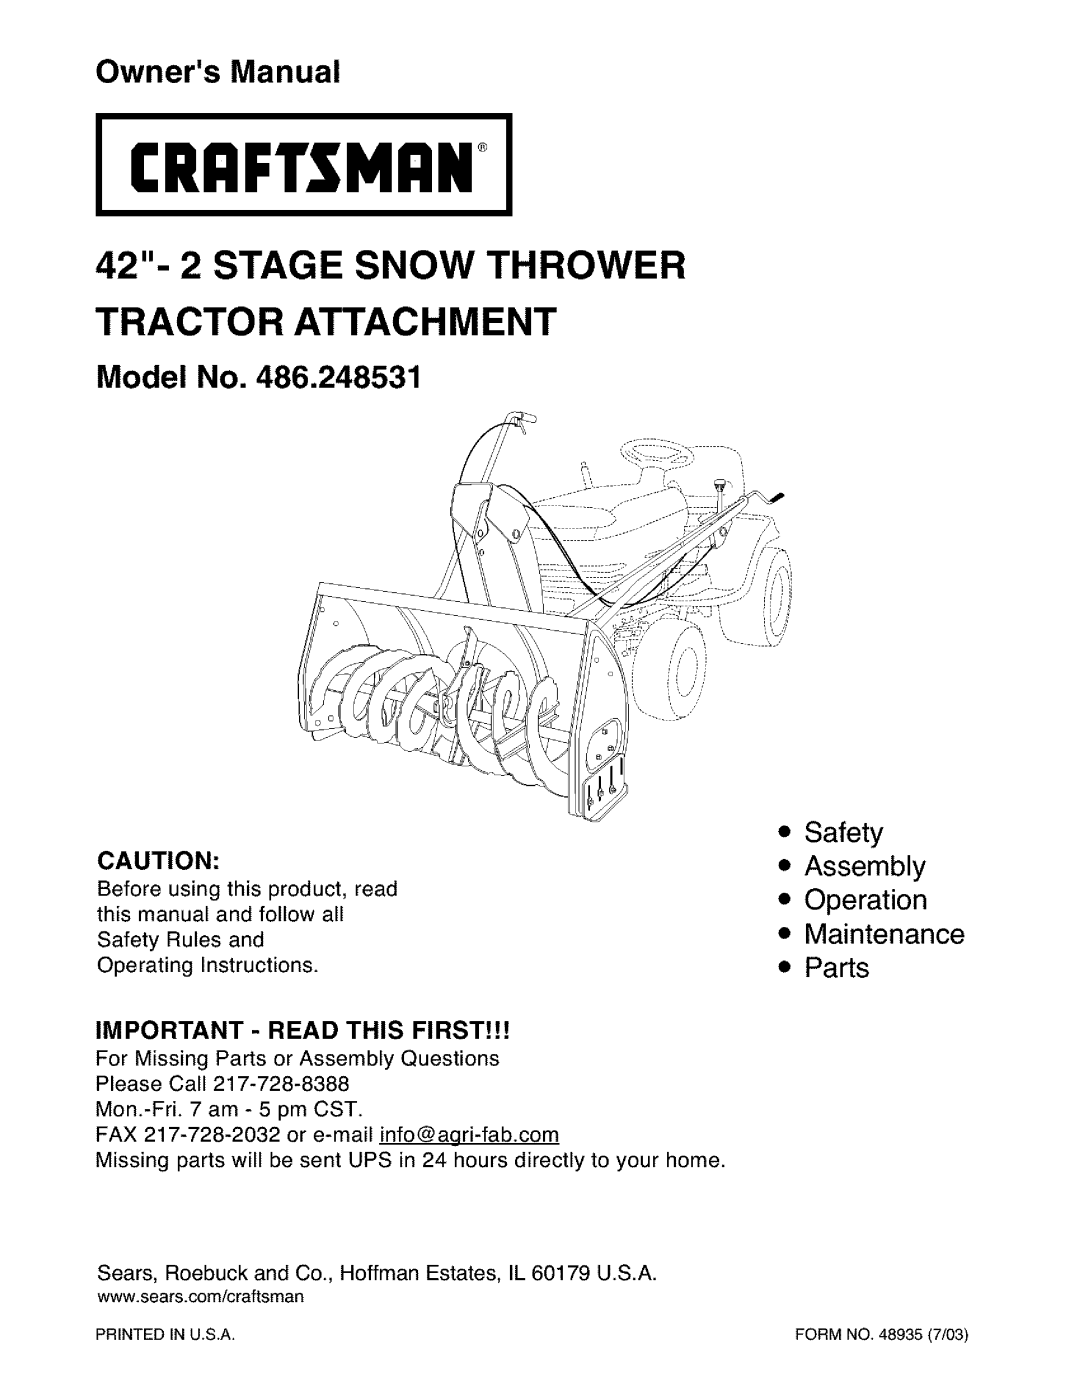 Craftsman 486.248531 owner manual Icrafi,Sman+, 42- 2 STAGE SNOW THROWER TRACTO R ATTAC H M E NT, Model No 